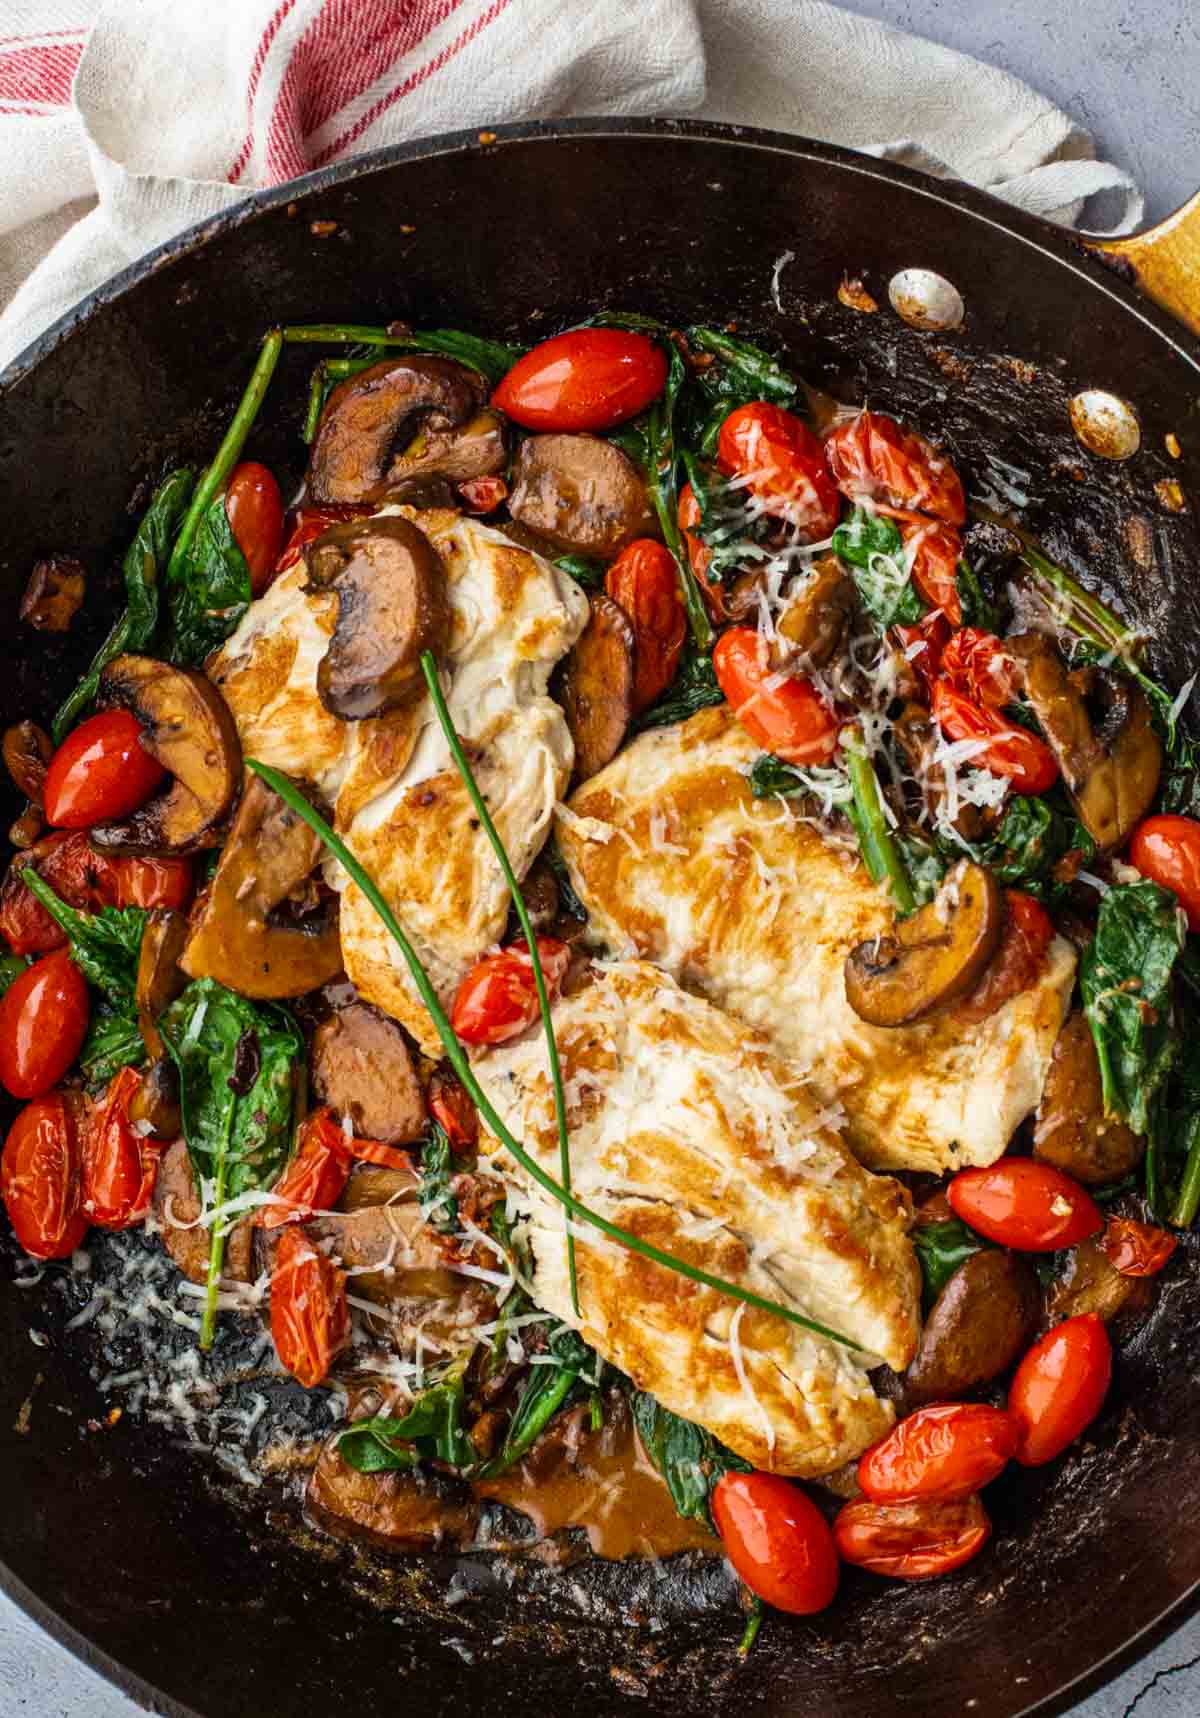 Chicken mushroom and spinach skillet with cherry tomatoes and parmesan.